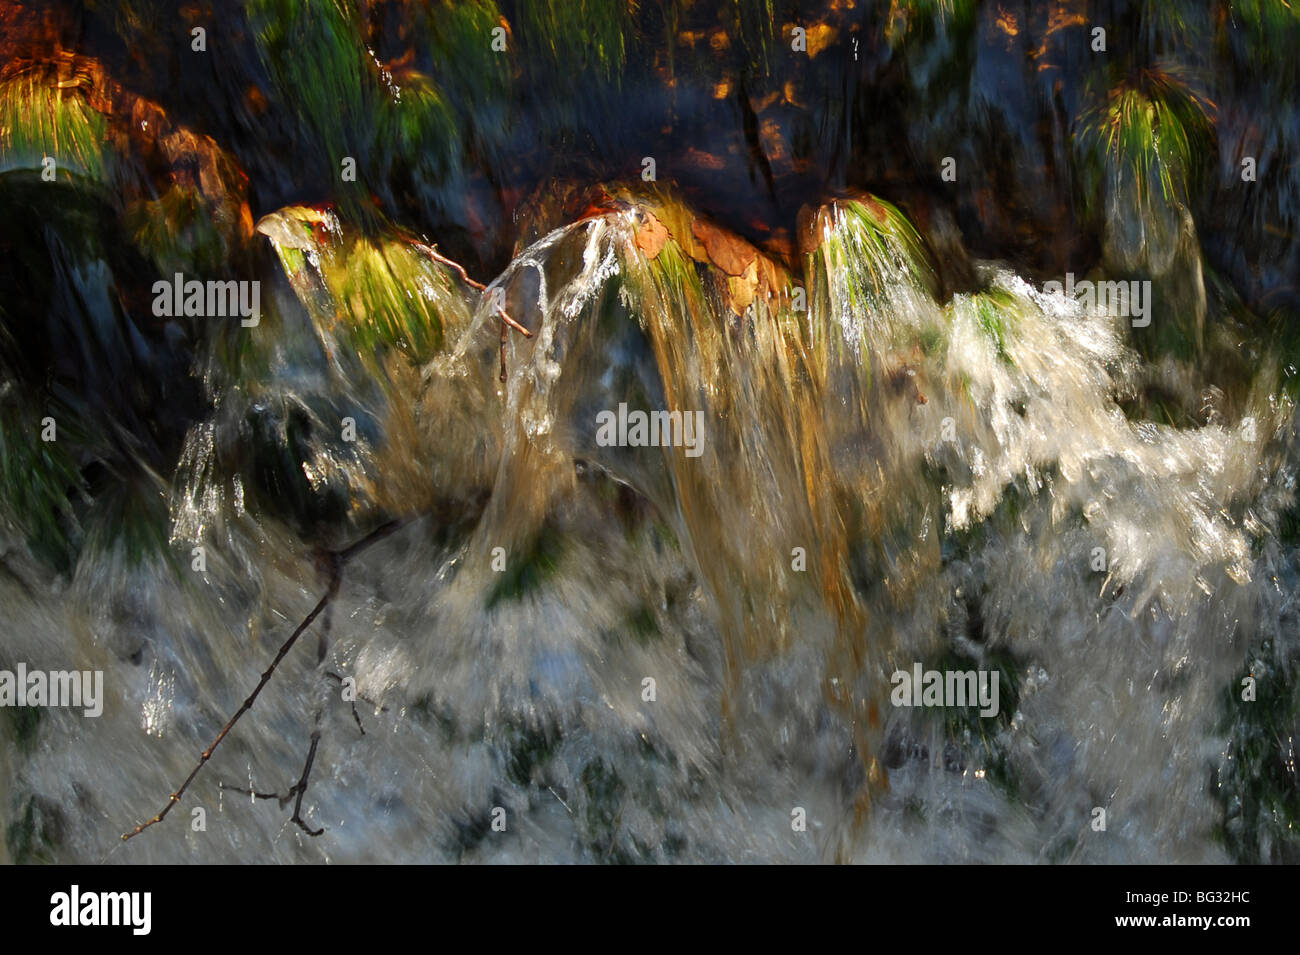 Abstract scene of a waterfall Stock Photo